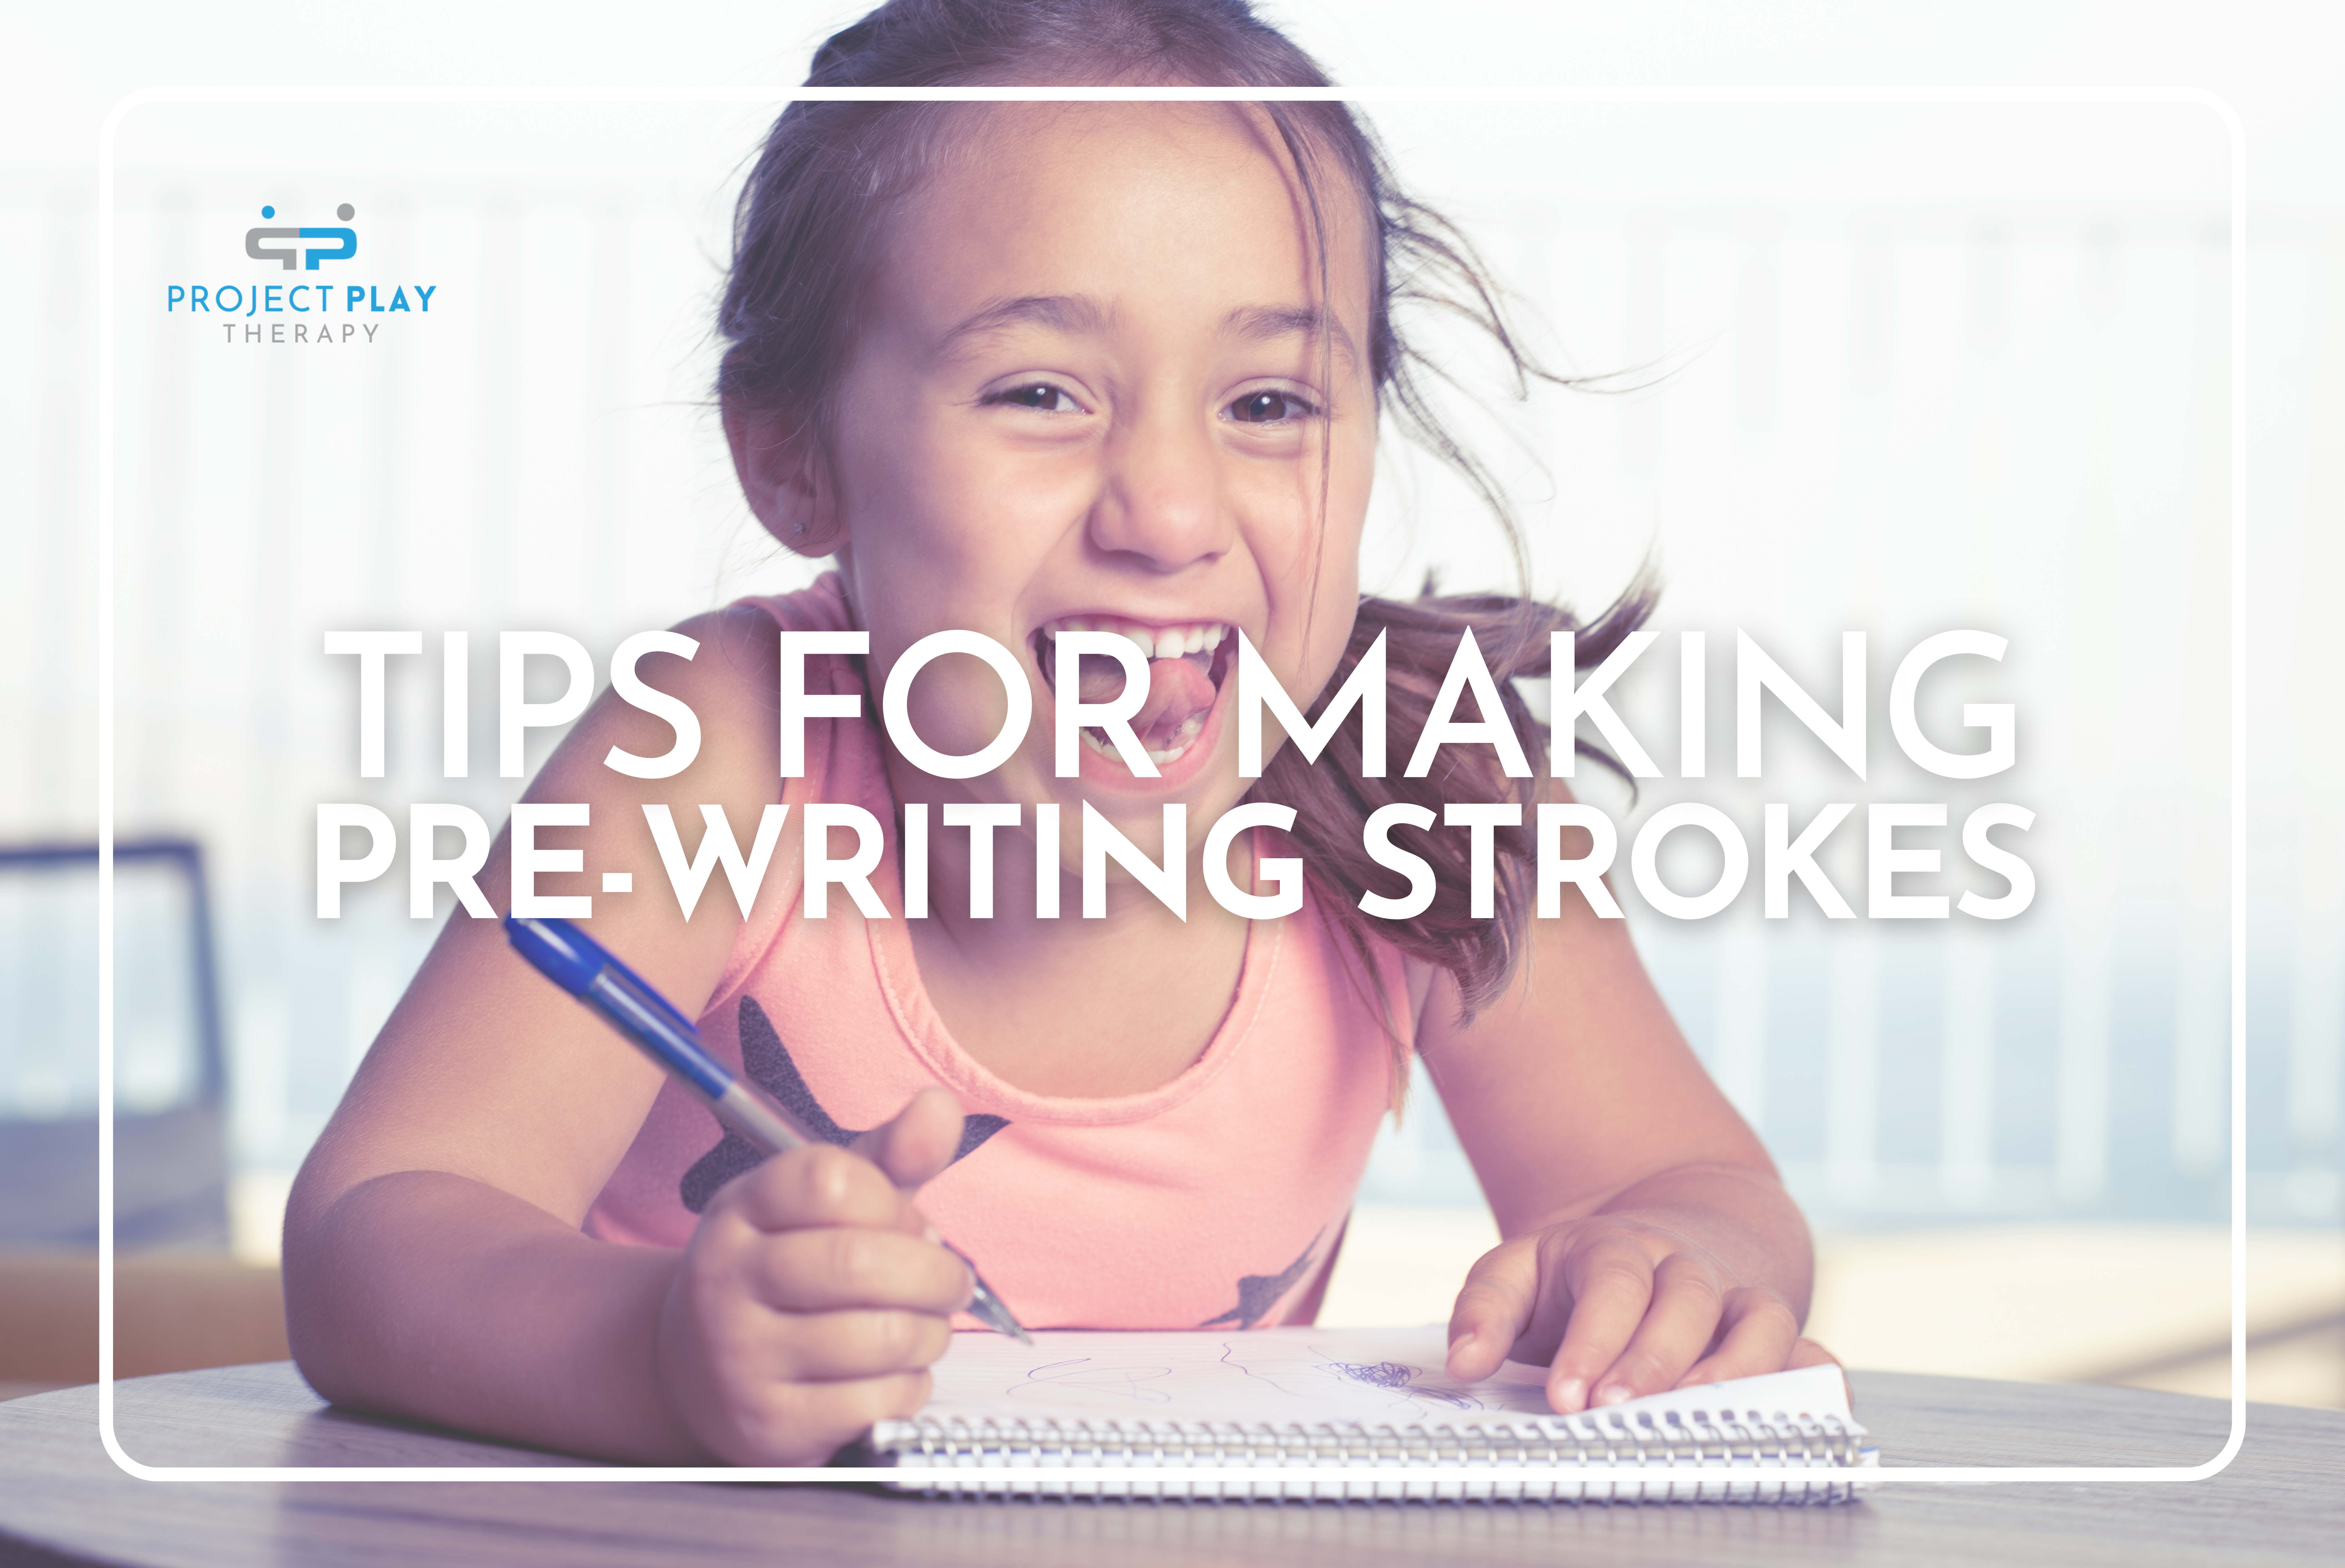 Pre-Writing Strokes and Shapes